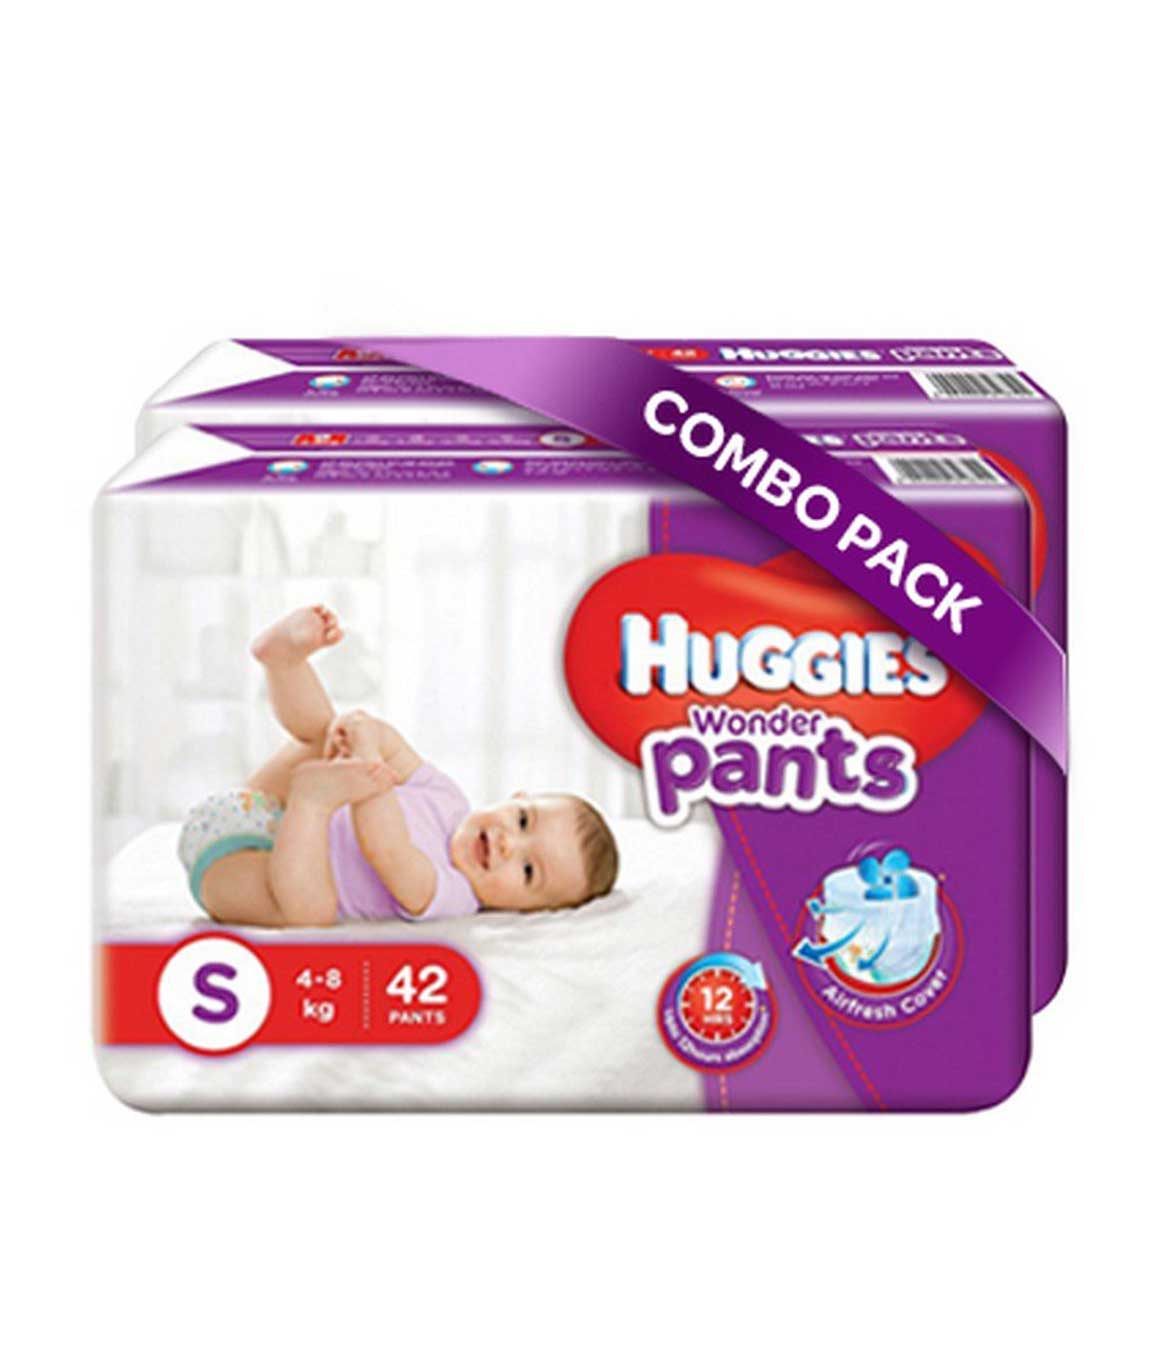 Buy Huggies Complete Comfort Wonder Pants Small (S) Size (4-8 Kgs) Baby Diaper  Pants, 86 count, India's Fastest Absorbing Diaper with upto 4x faster  absorption, Unique Dry Xpert Channel Online at Low